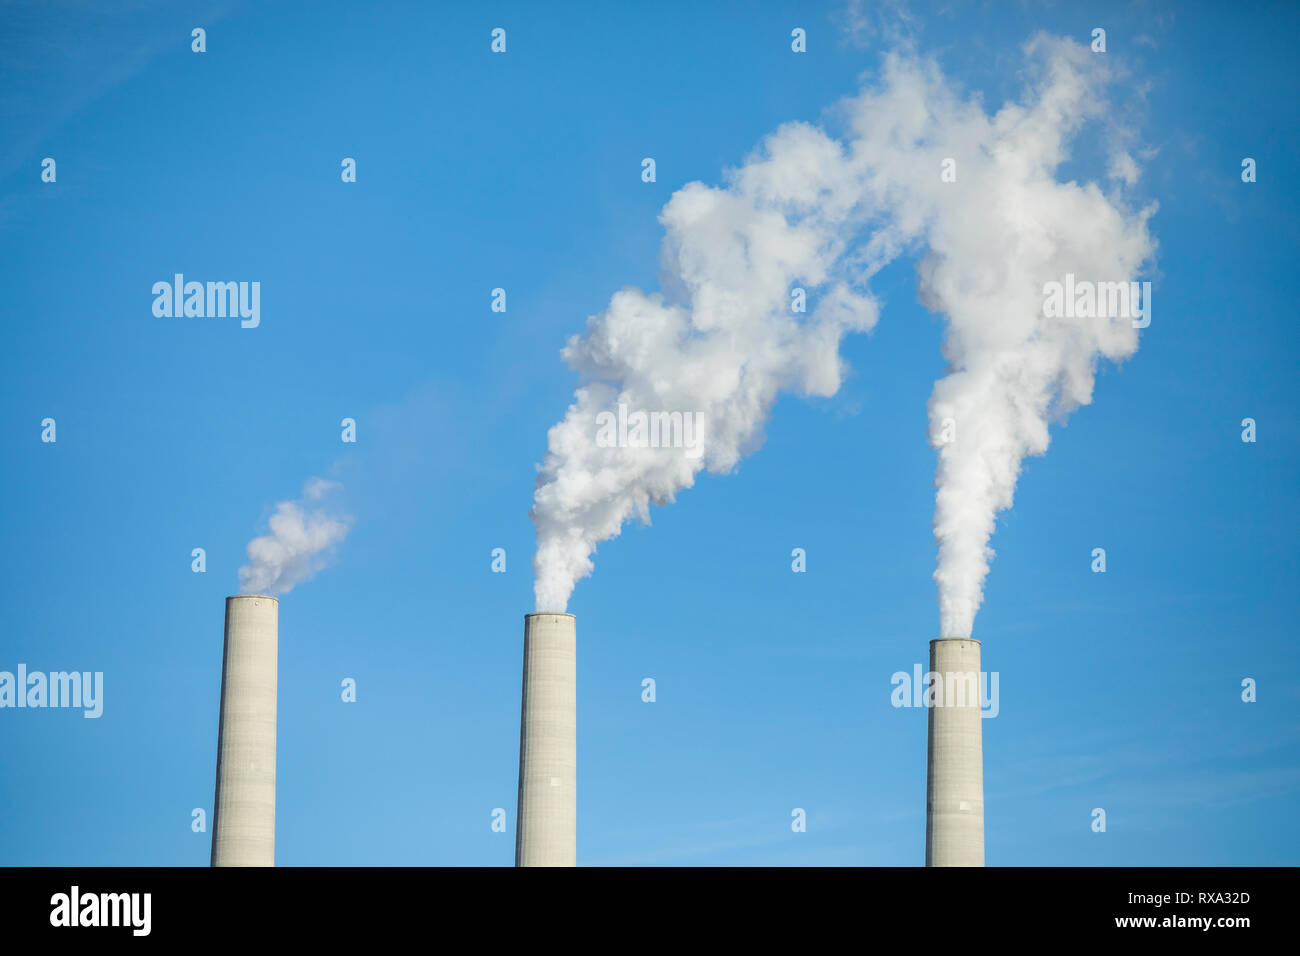 Low angle view of smoke emitting from chimneys against clear blue sky Stock Photo